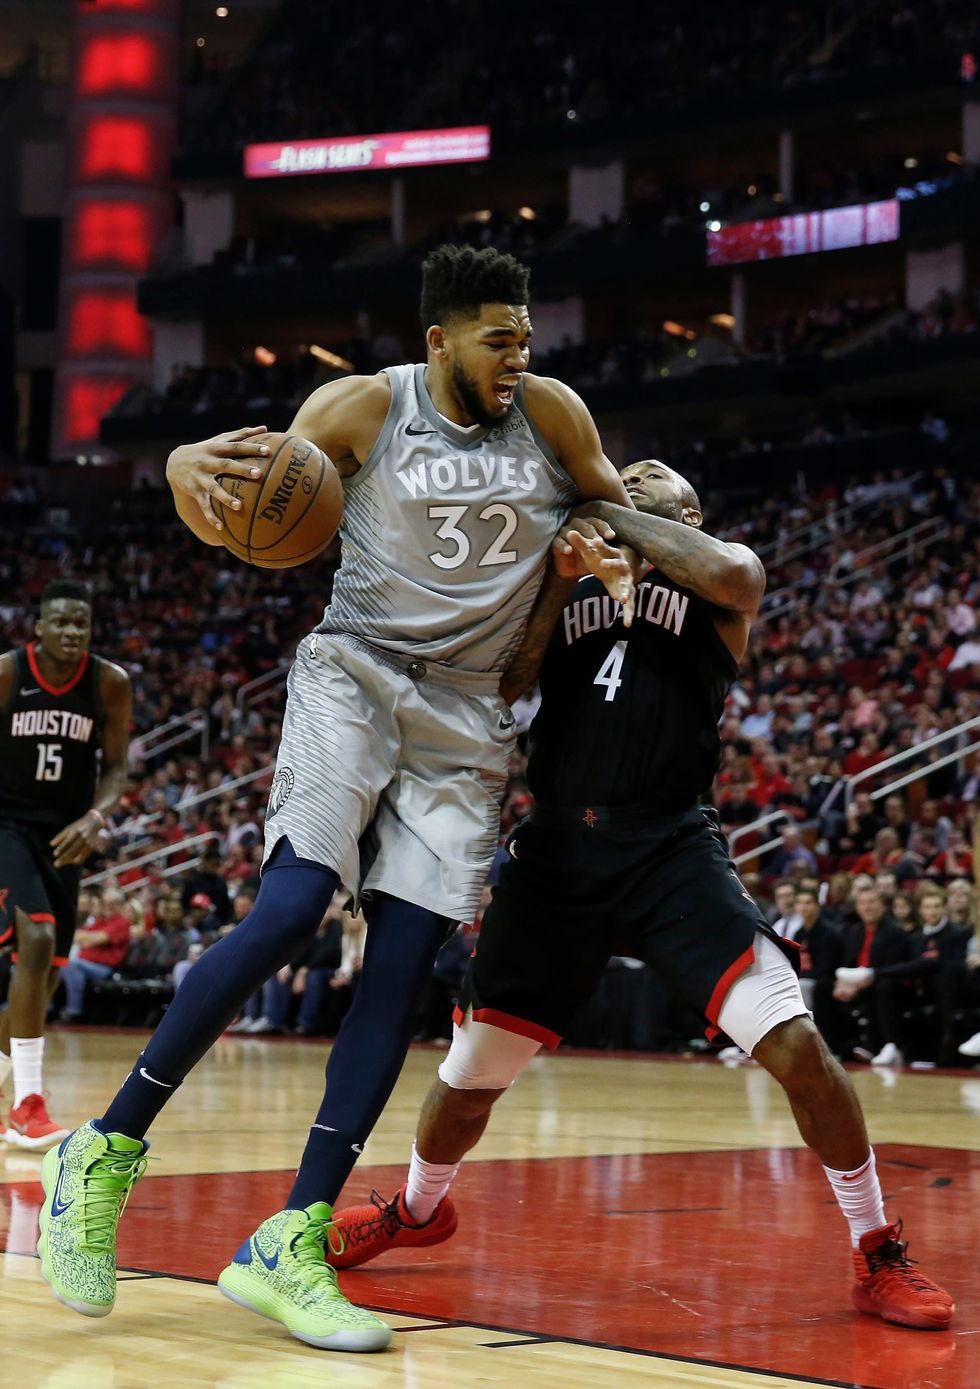 Joel Blank: Timberwolves will not be an easy out for Rockets